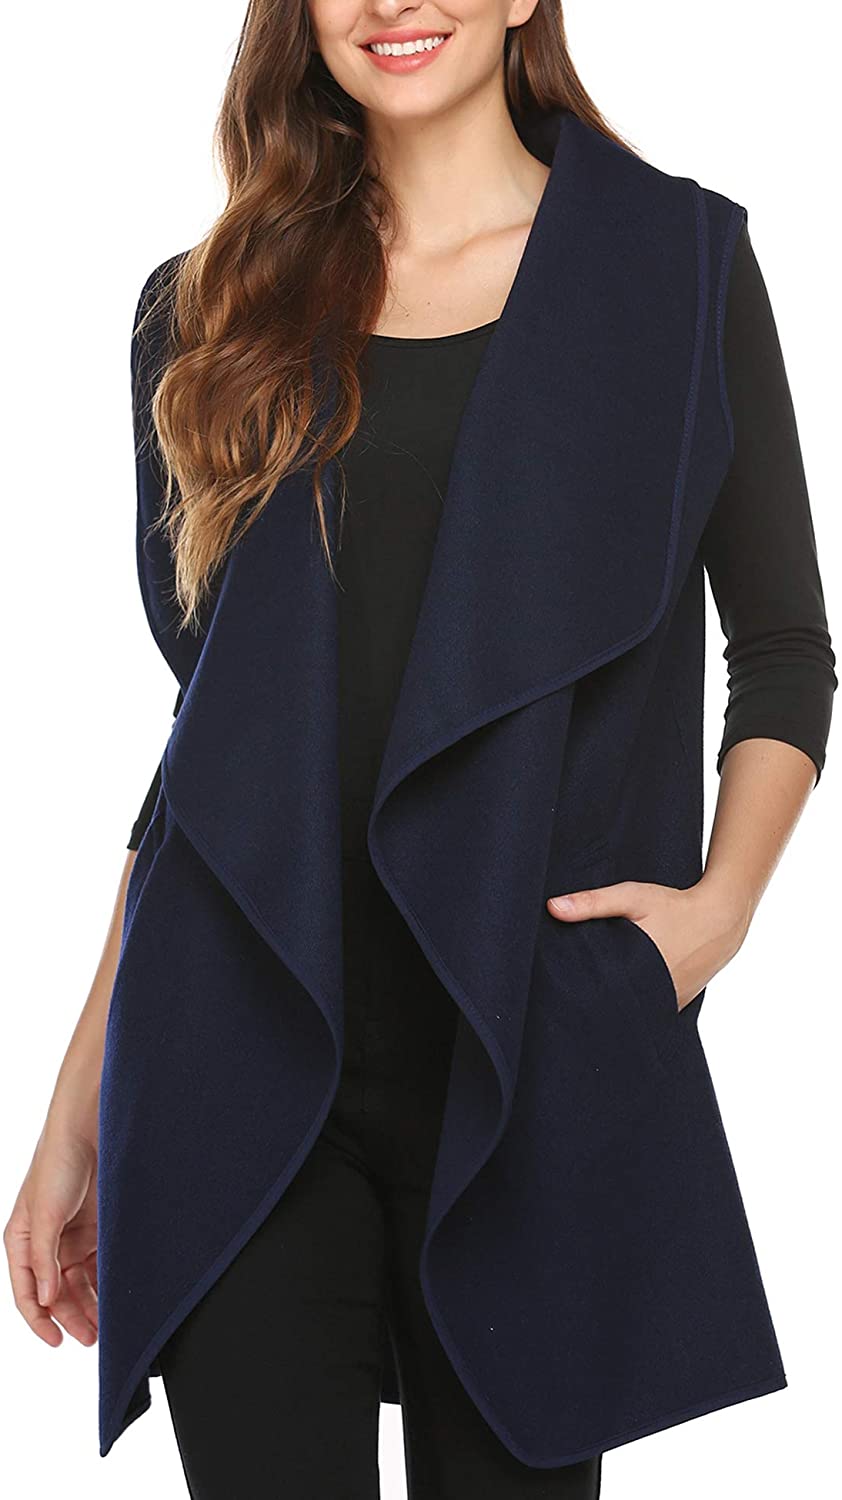 SoTeer Womens Long Sweater Vests Lapel Open Front Sleeveless Cardigan Coat  with | eBay